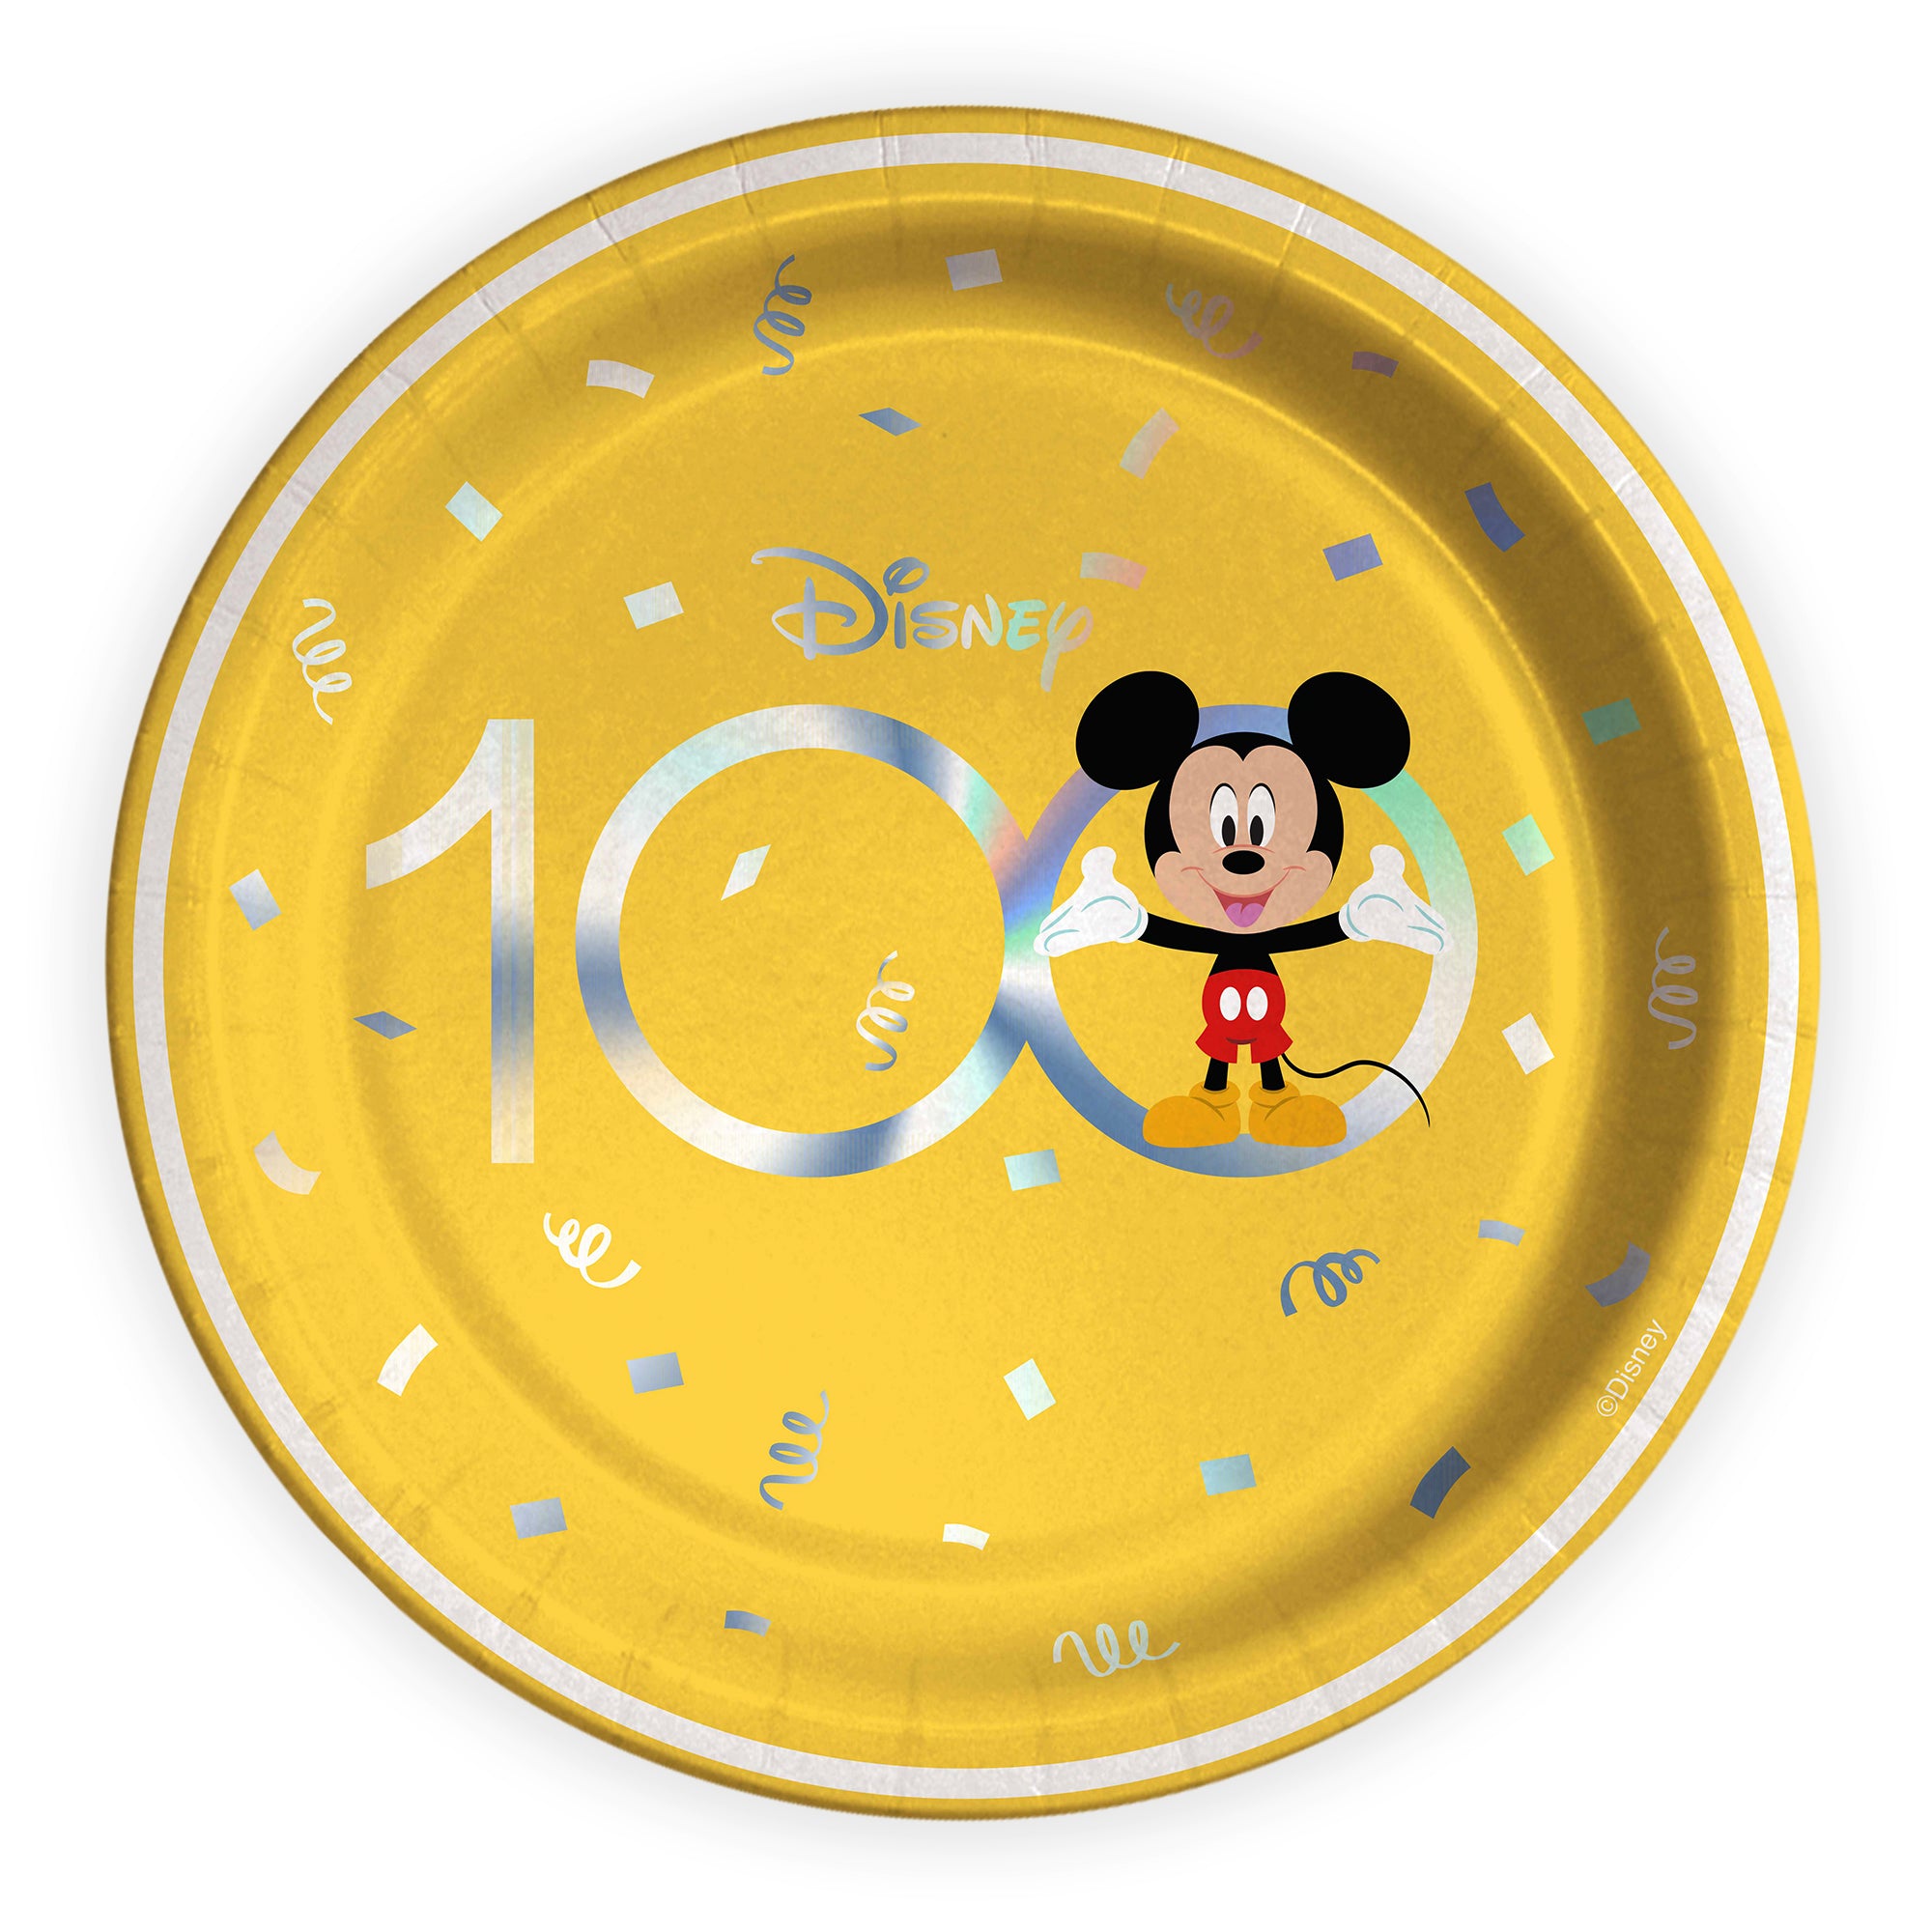 Cute Celebration D100 Mickey & Minnie Plates 9in, 8pcs - Party Centre